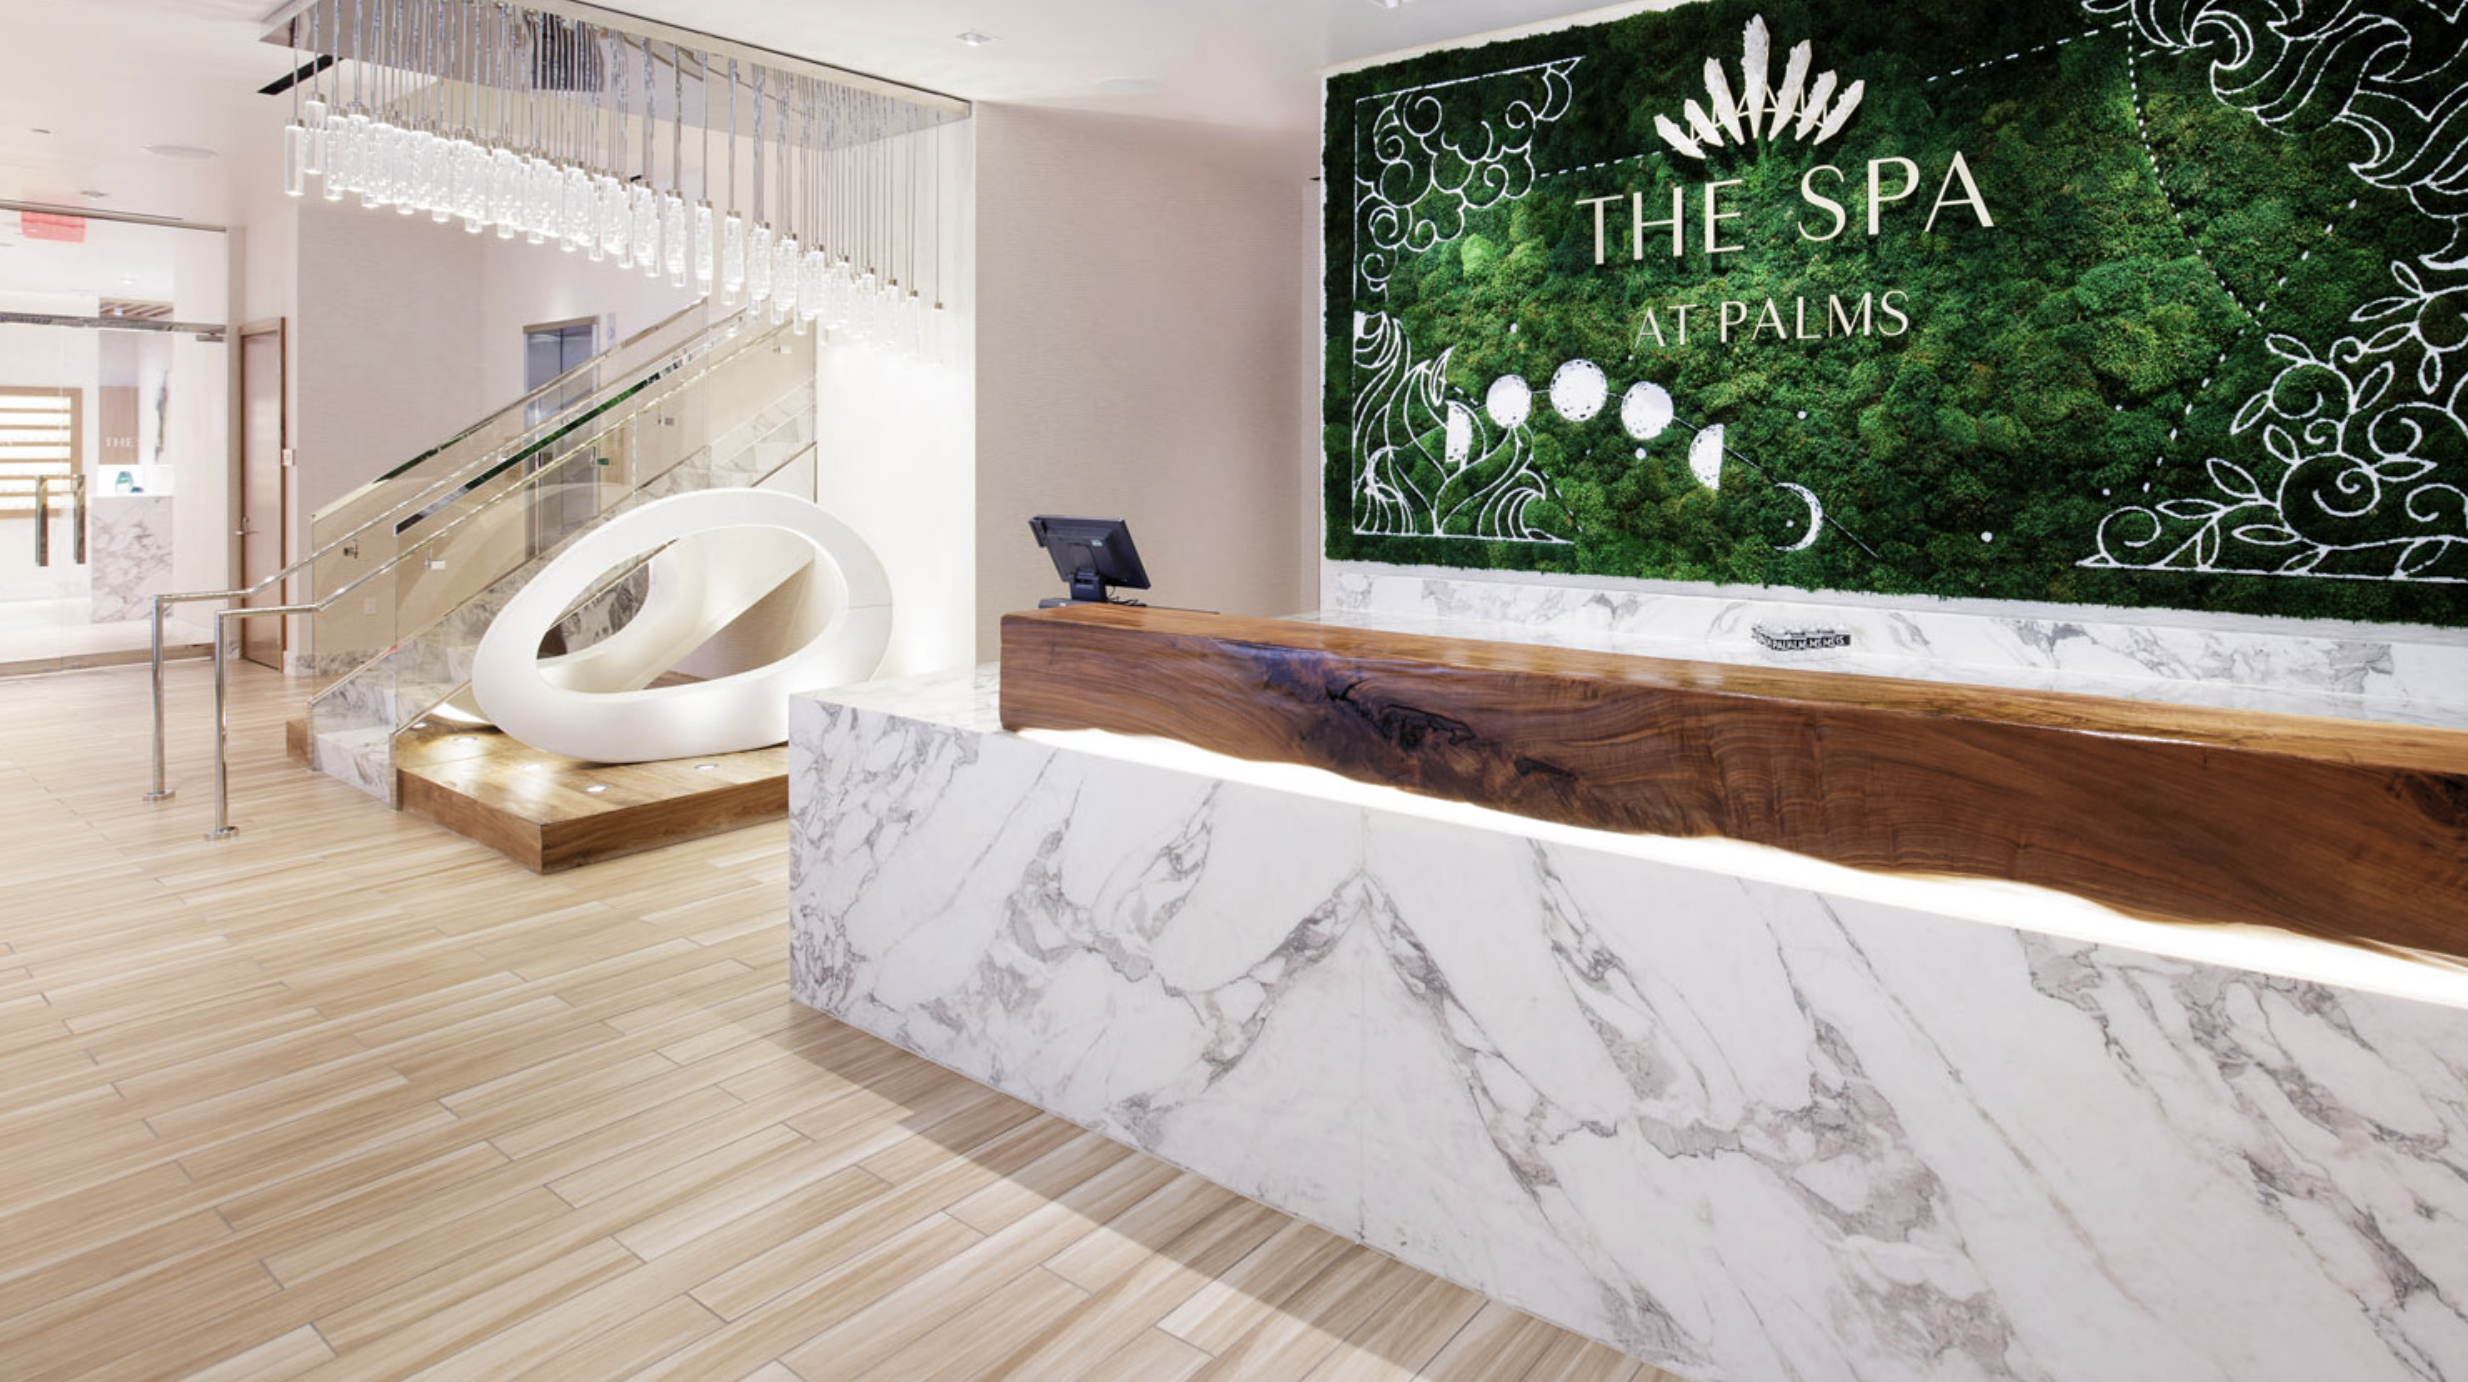 Luxury Spa in Las Vegas, Nevada at Palms. The Spa at Palms is a luxury spa with 17,000 sq. ft. of elegant beauty featuring three levels to fully treat yourself. Full servce spa, fitness center, Zen Studio for Yoga and more than 15 treatment sanctuaries.